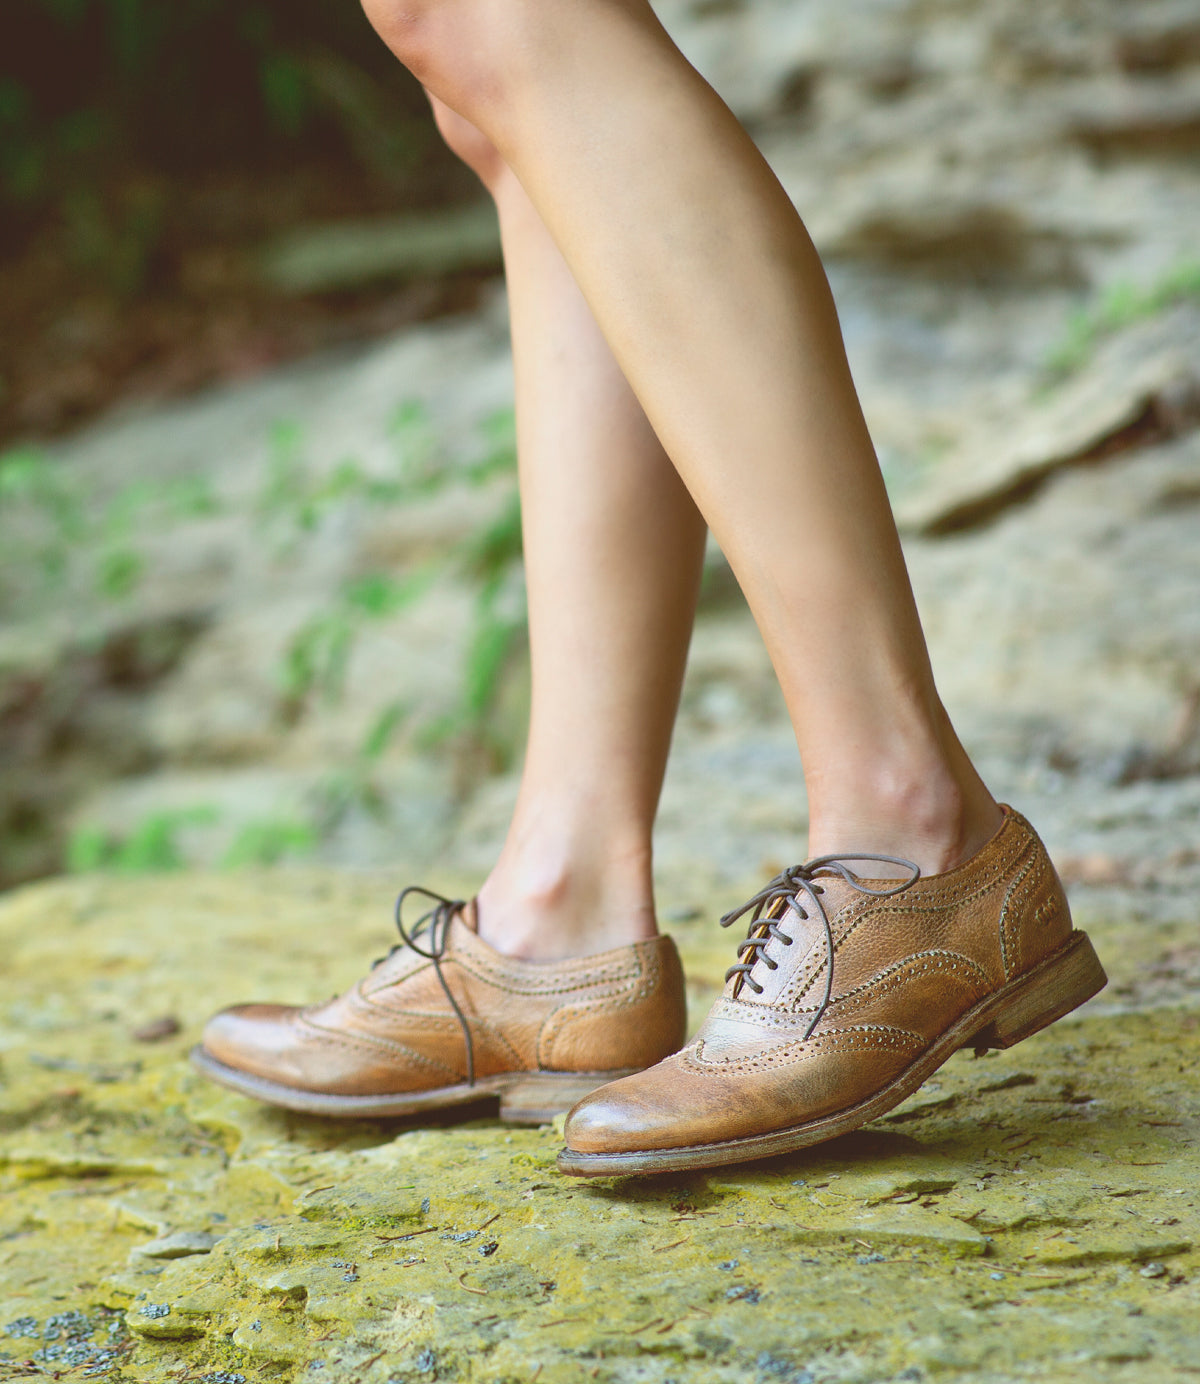 A woman's legs standing on a rock wearing tan Bed Stu Oxford shoes.